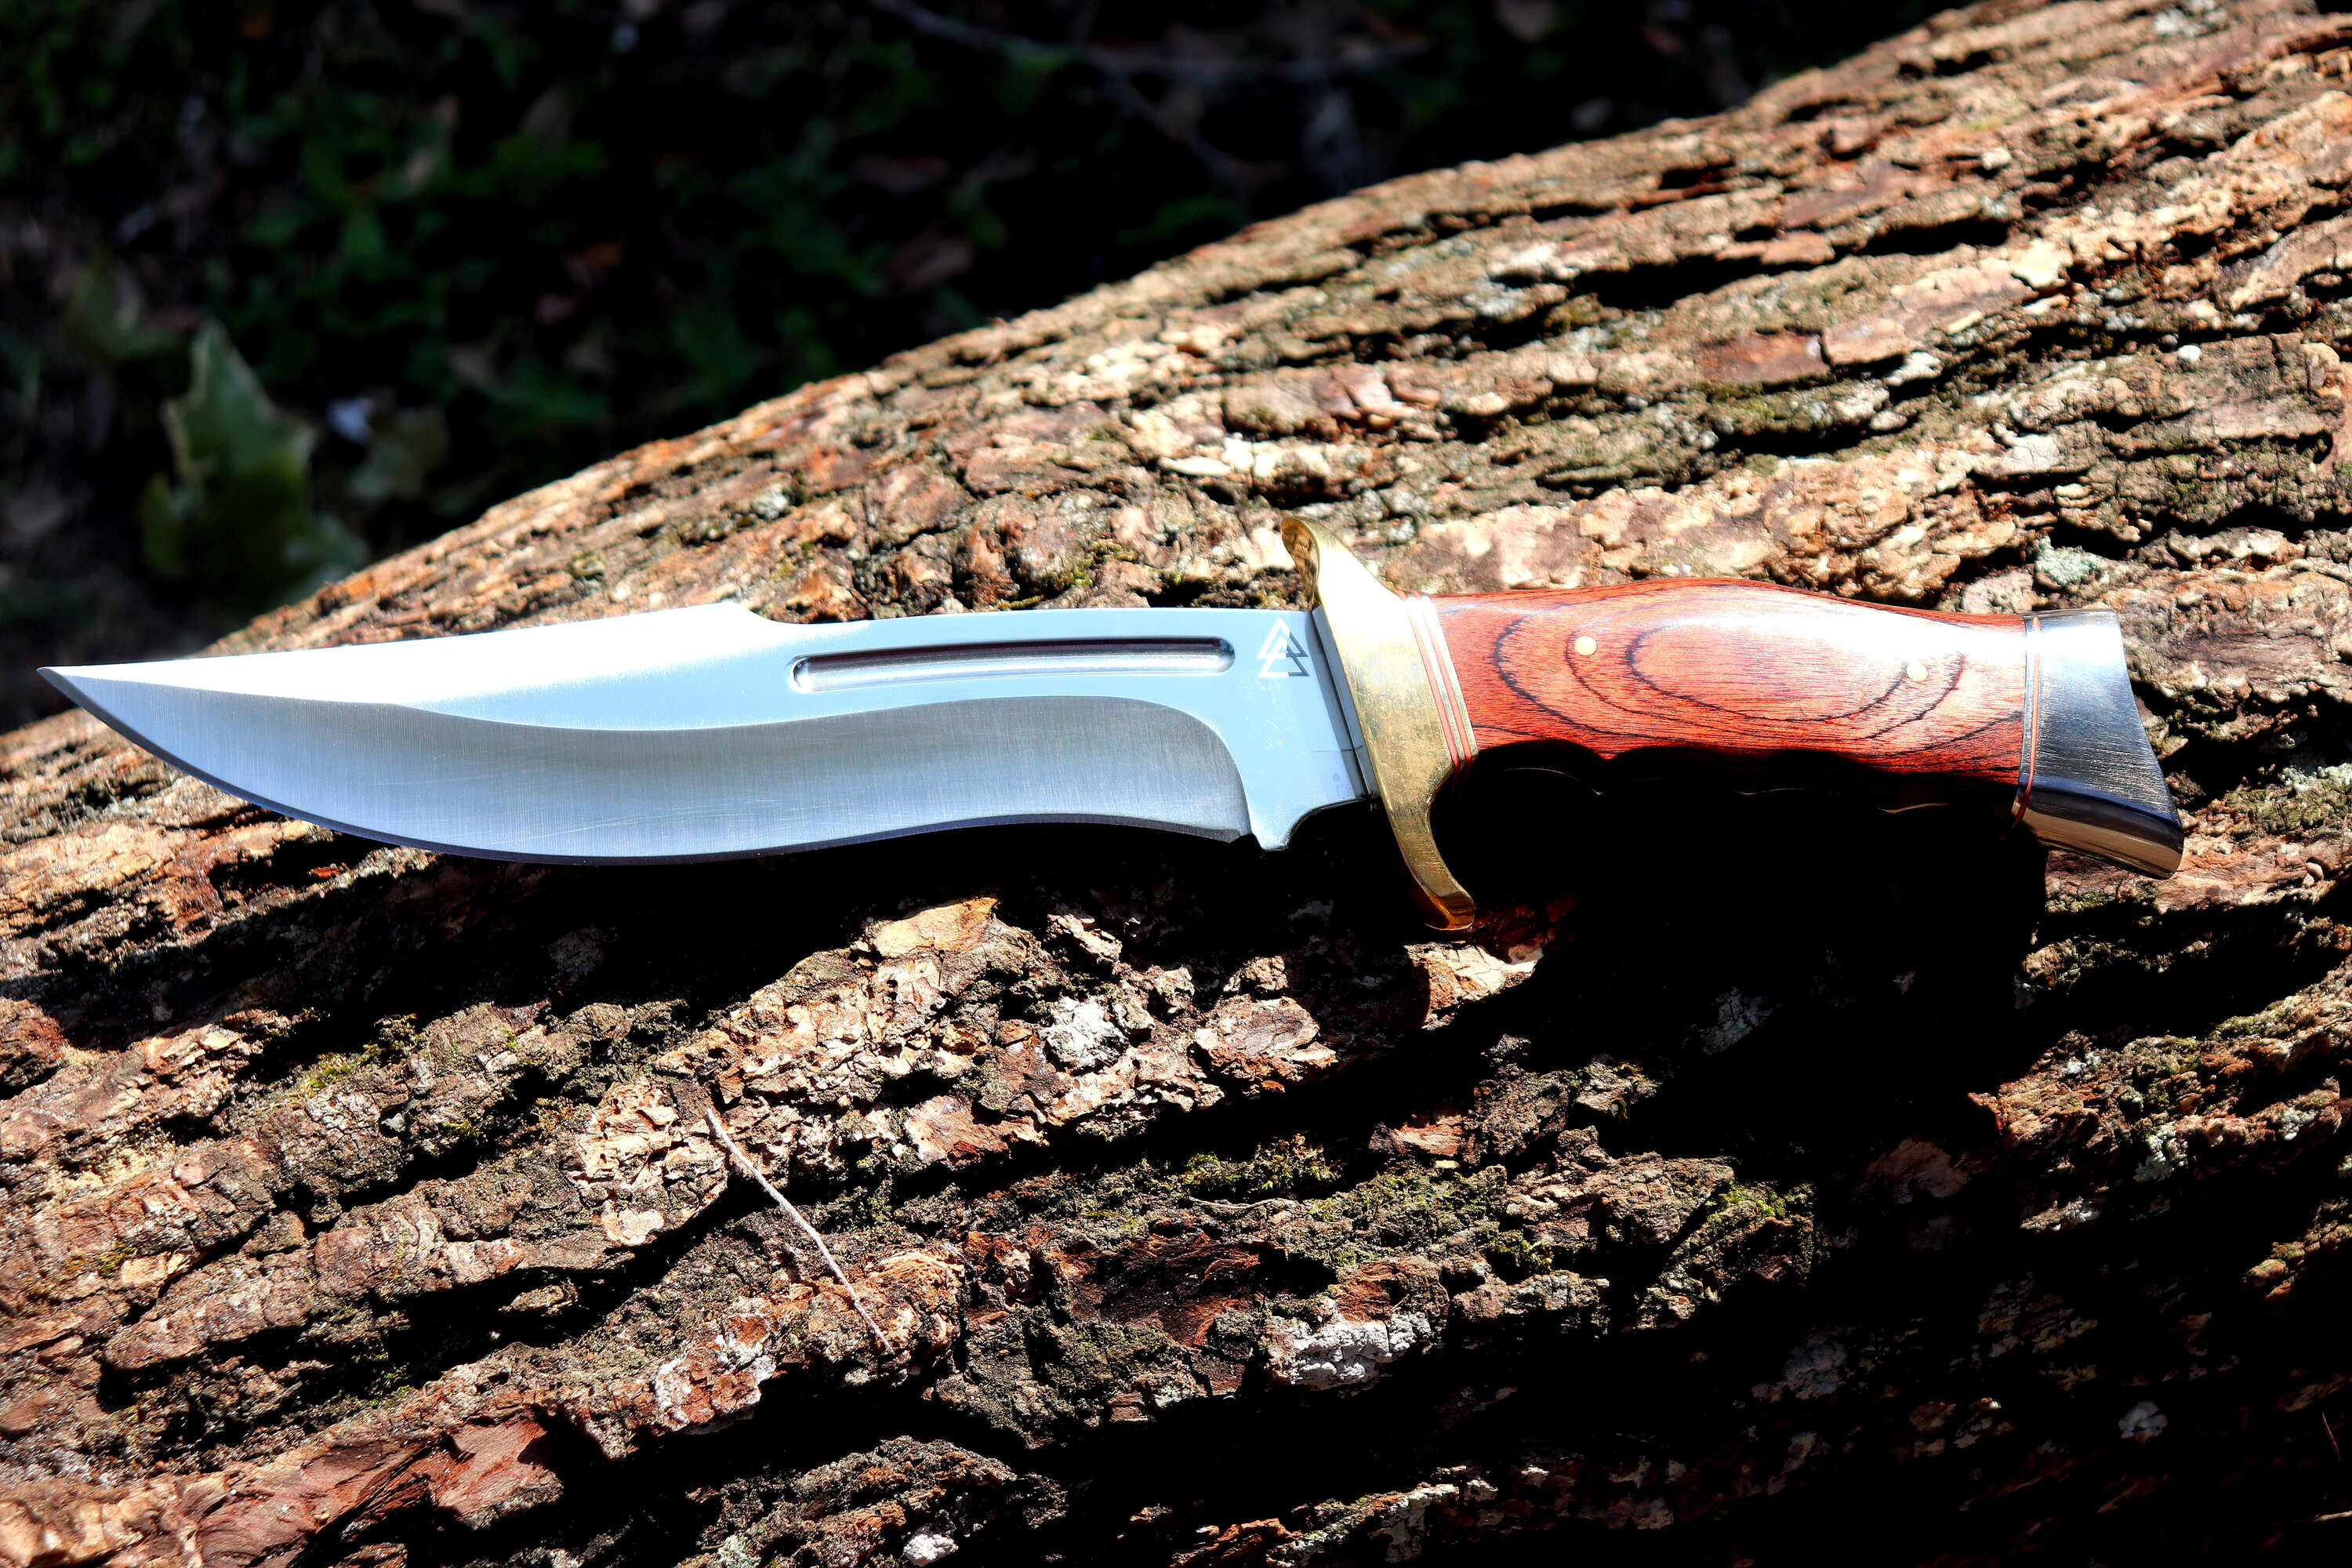 Kratos hunting knife on top of a tree log